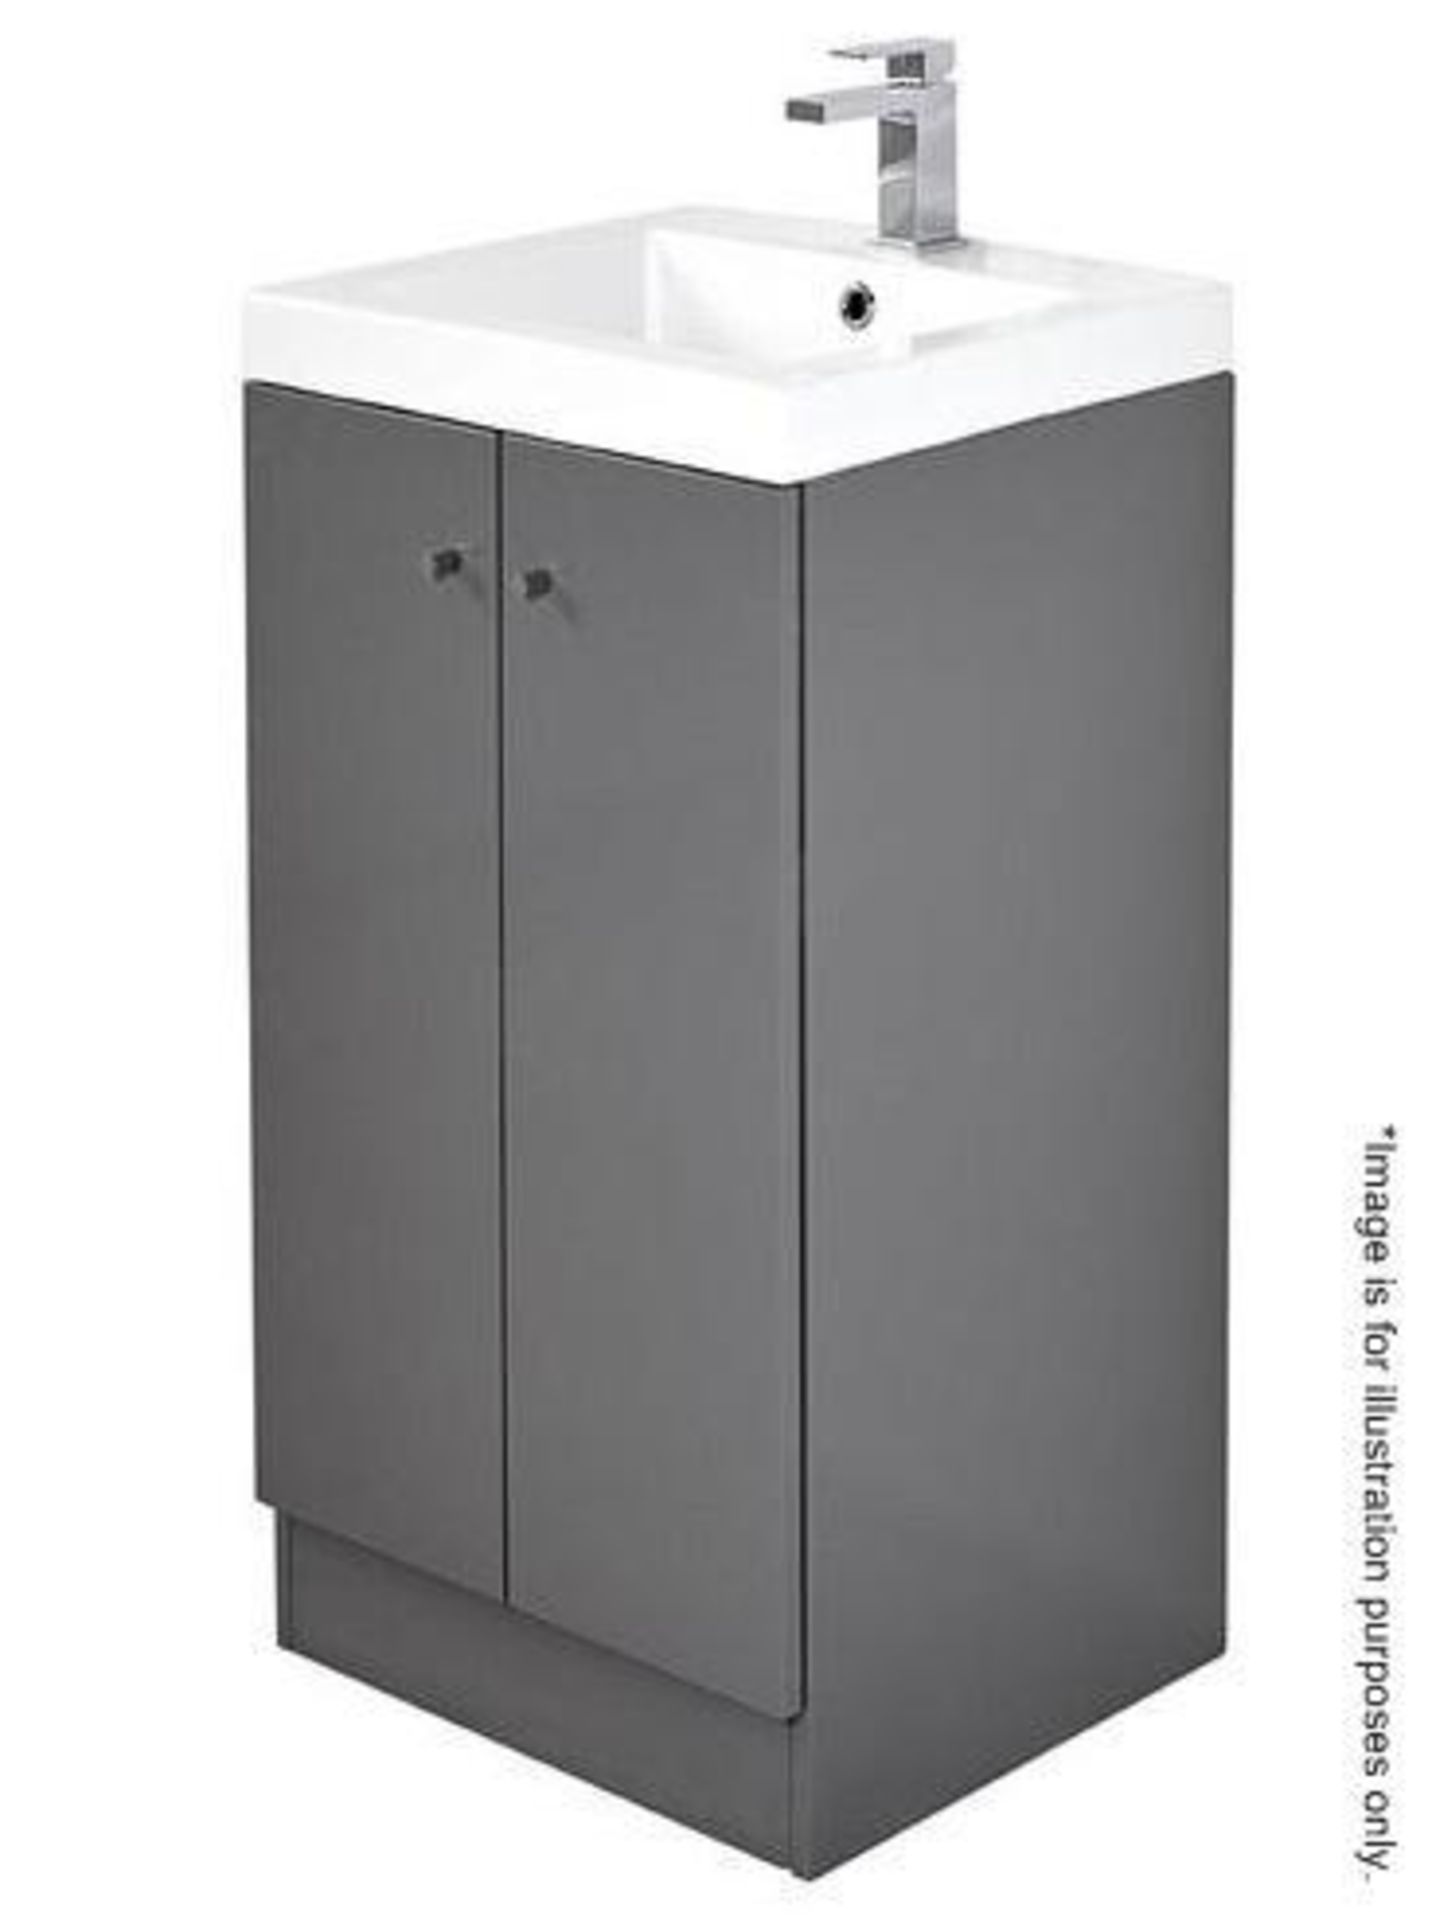 7 x Alpine Duo 400 Floorstanding Vanity Units In Gloss Grey - Brand New Boxed Stock - Dimensions: H8